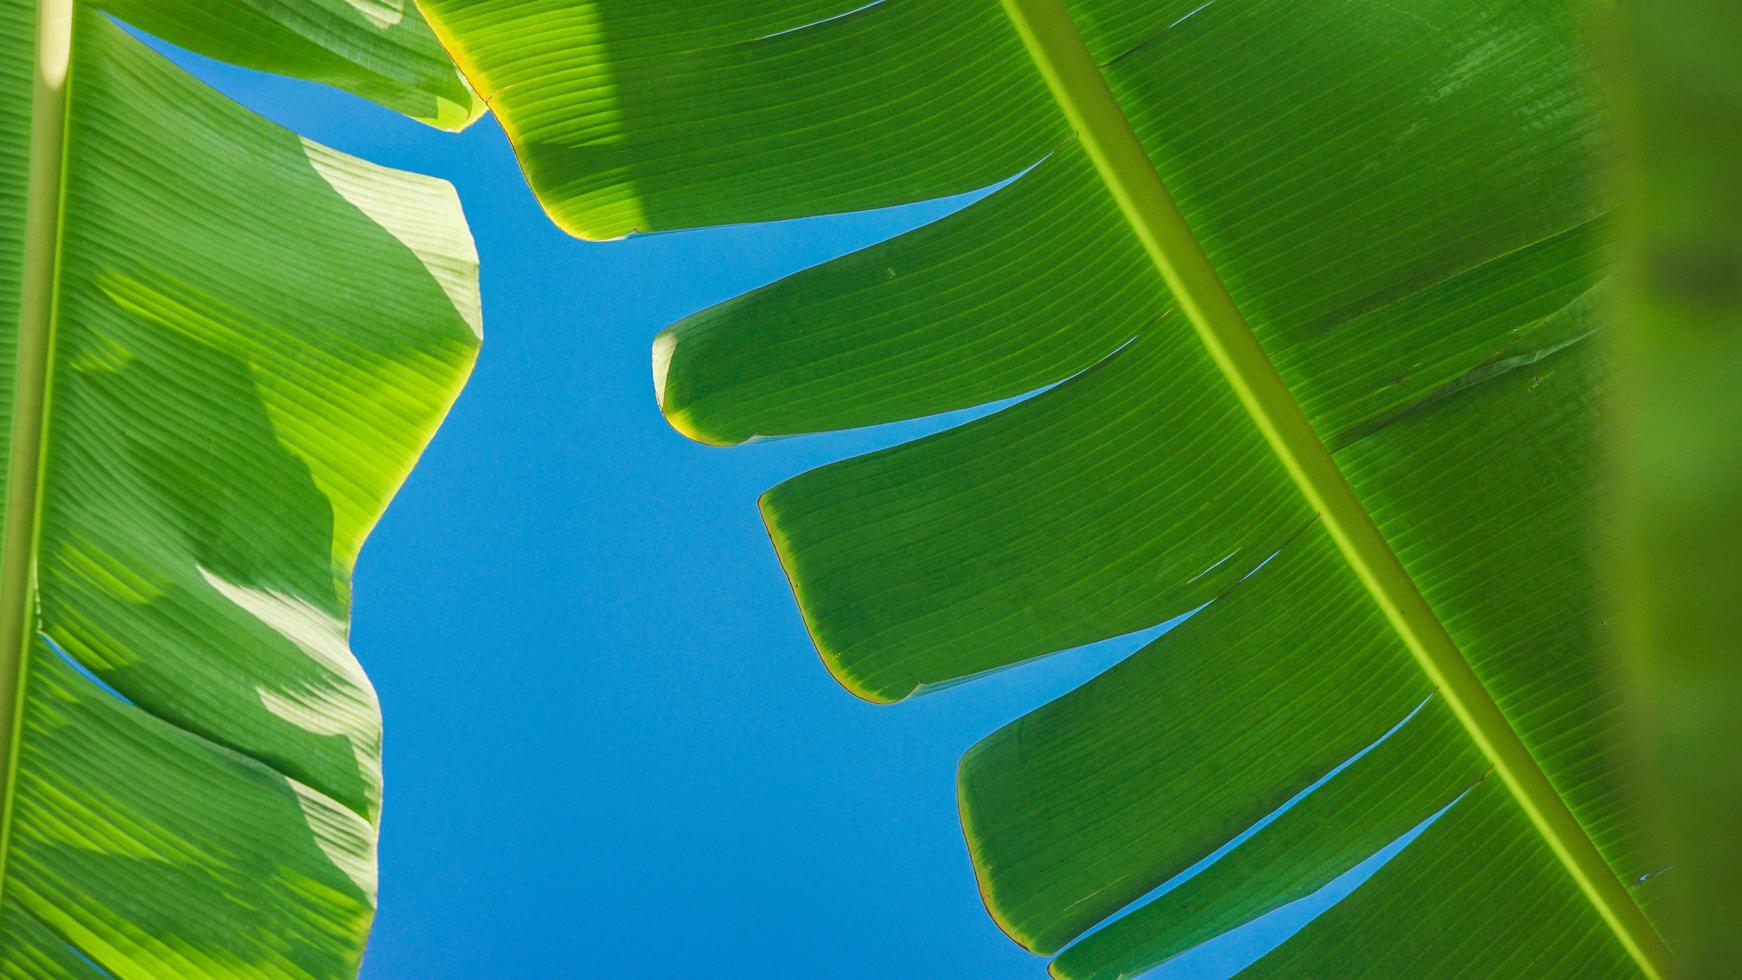 textured banana tree leaf background with bright blue sky photo